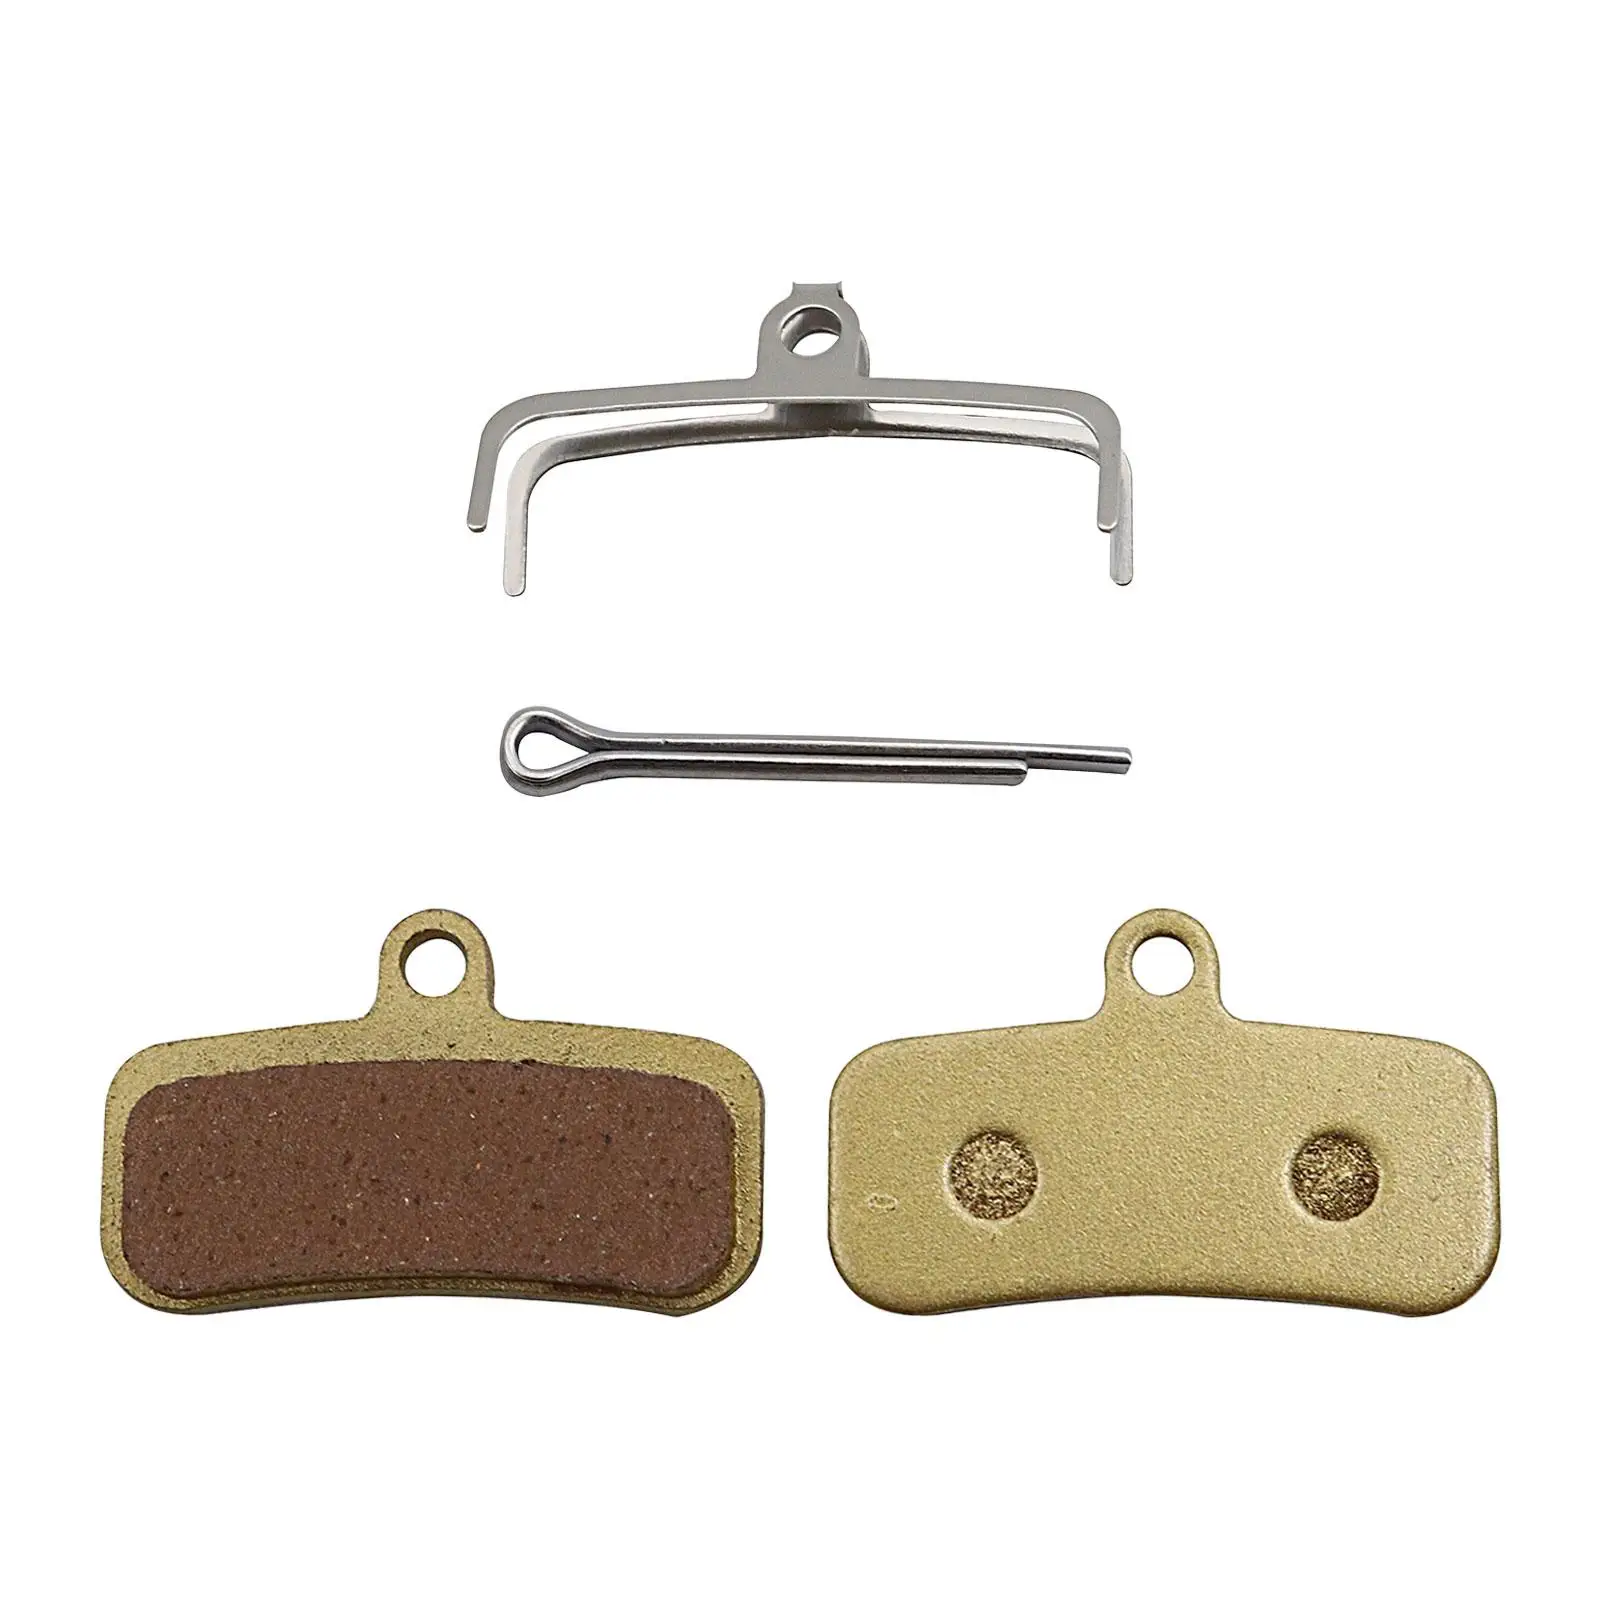 2 Pieces Motorcycle Front and Rear Brake Pads Brake Pad for Surron